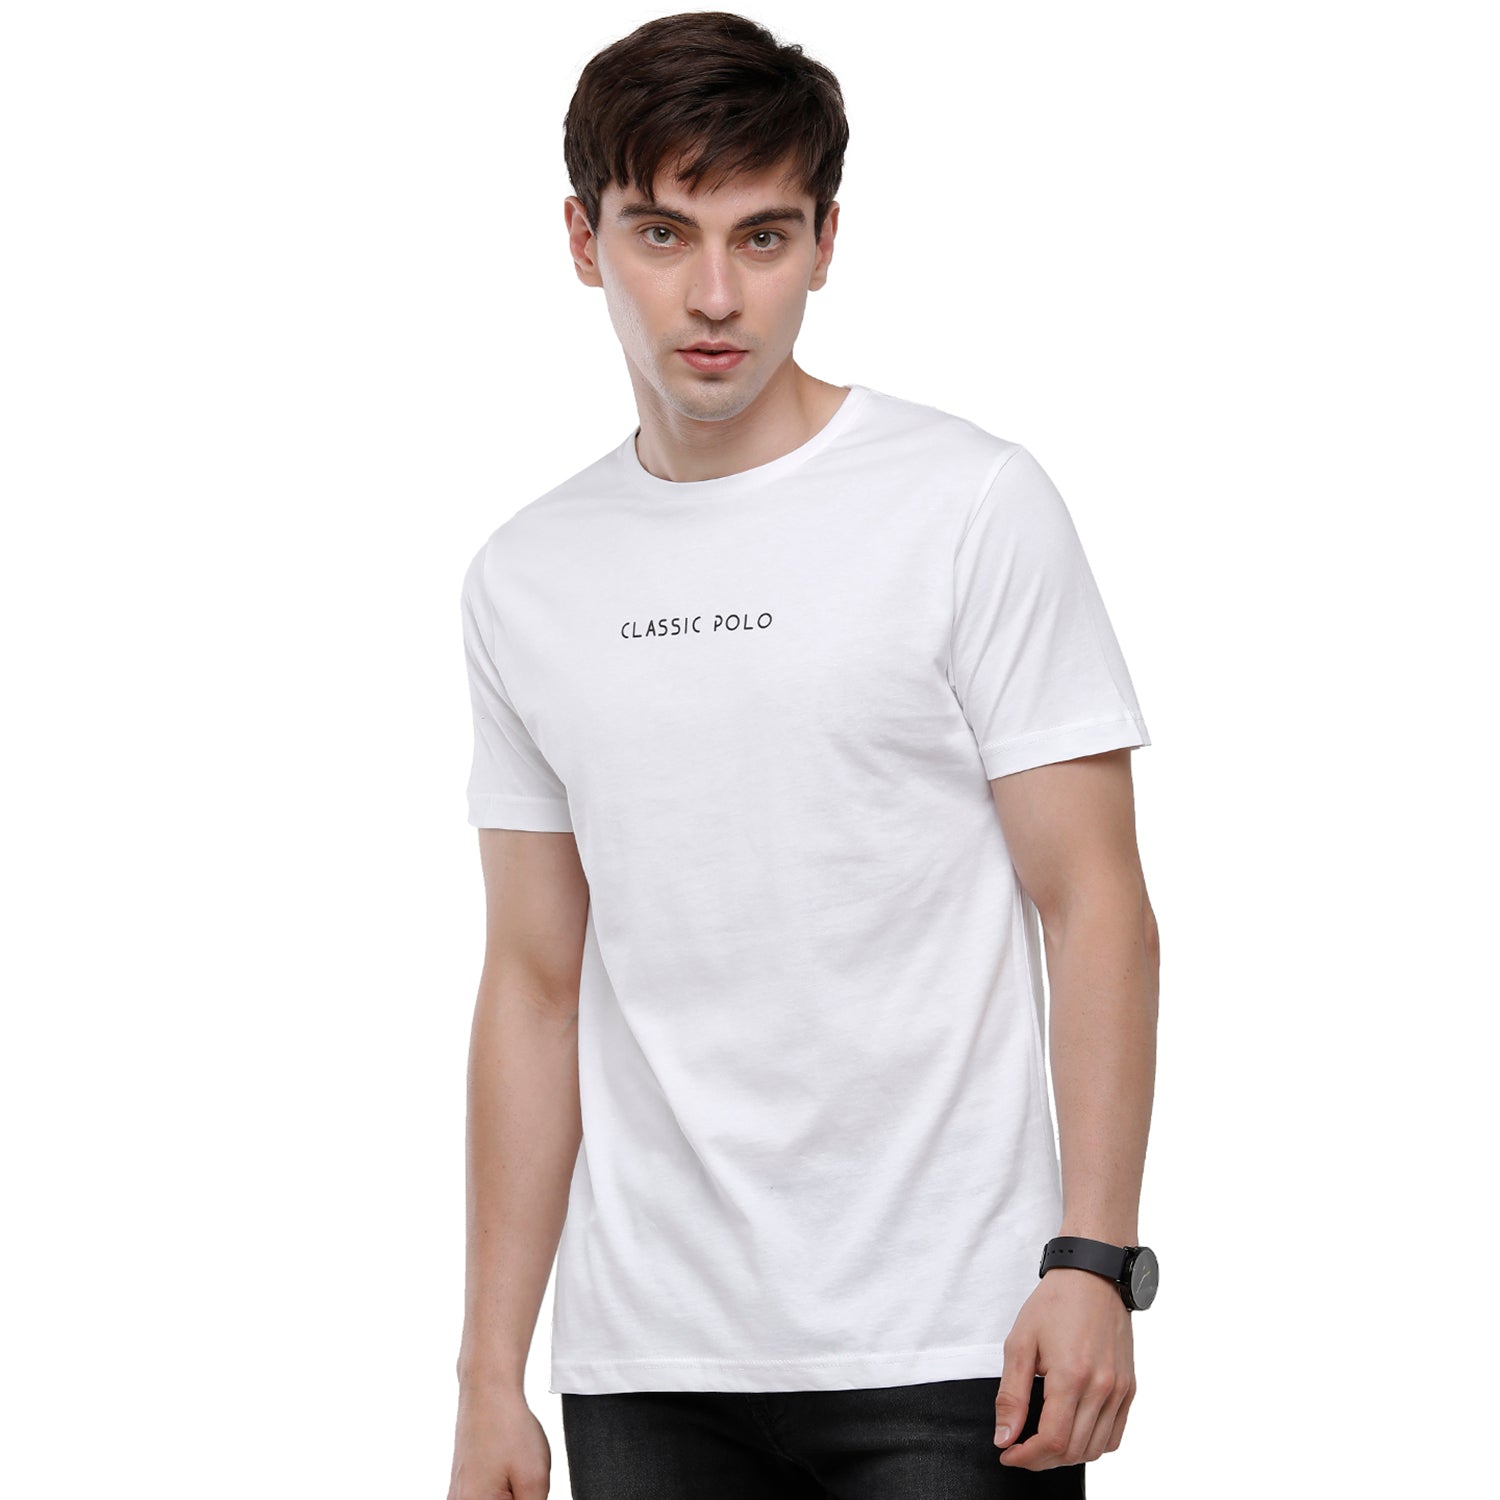 Classic Polo Mens 100% Cotton Solid Half Sleeve Round Neck T-Shirt - White (NOS-CERES-01 SF C) T-shirt Classic Polo 